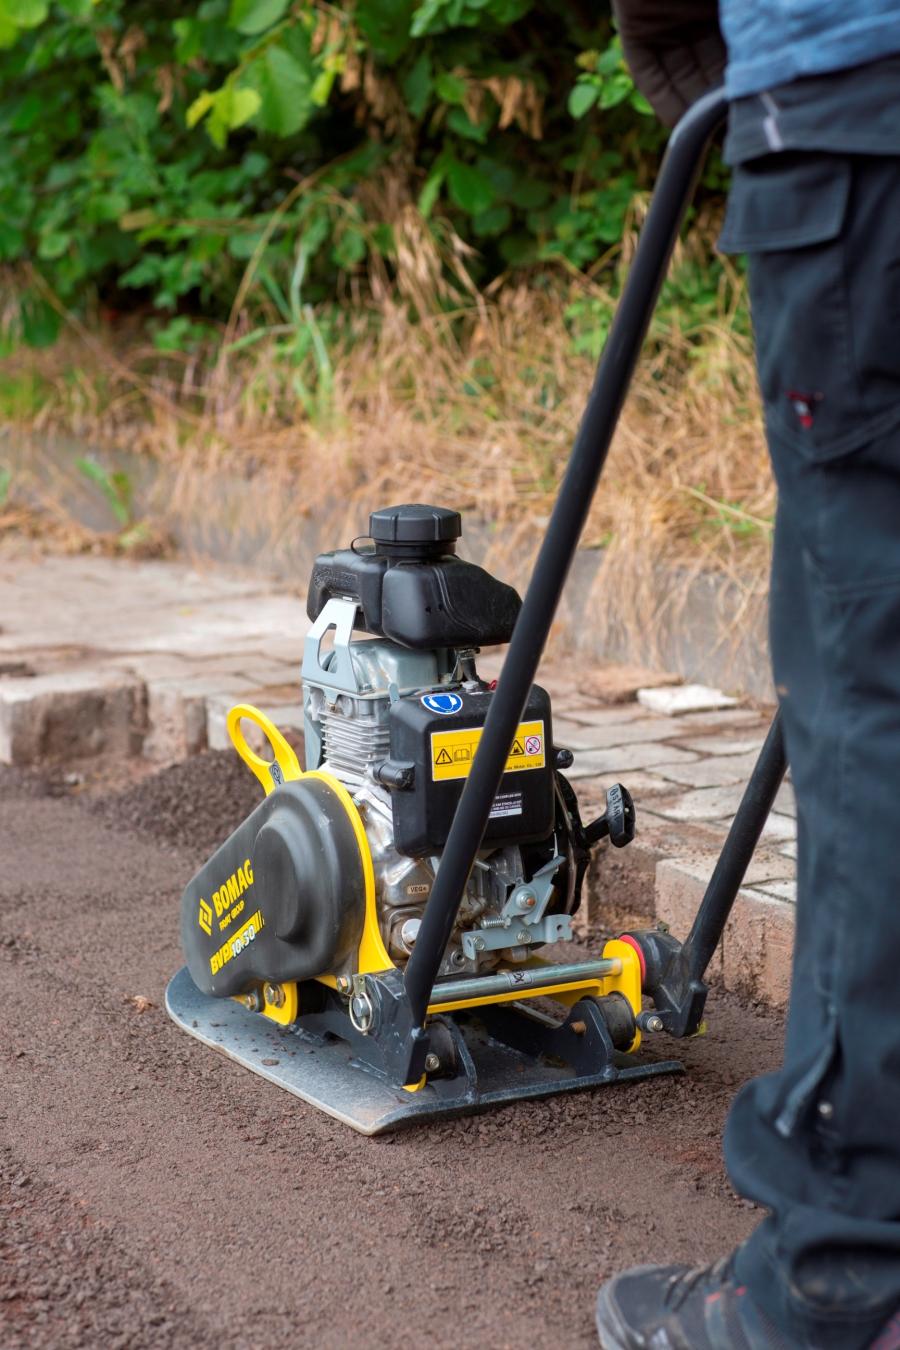 Bomag reports that their single direction vibratory plate compactors are great tools for contractors' day-to-day use in soil and asphalt repair and maintenance compaction applications.